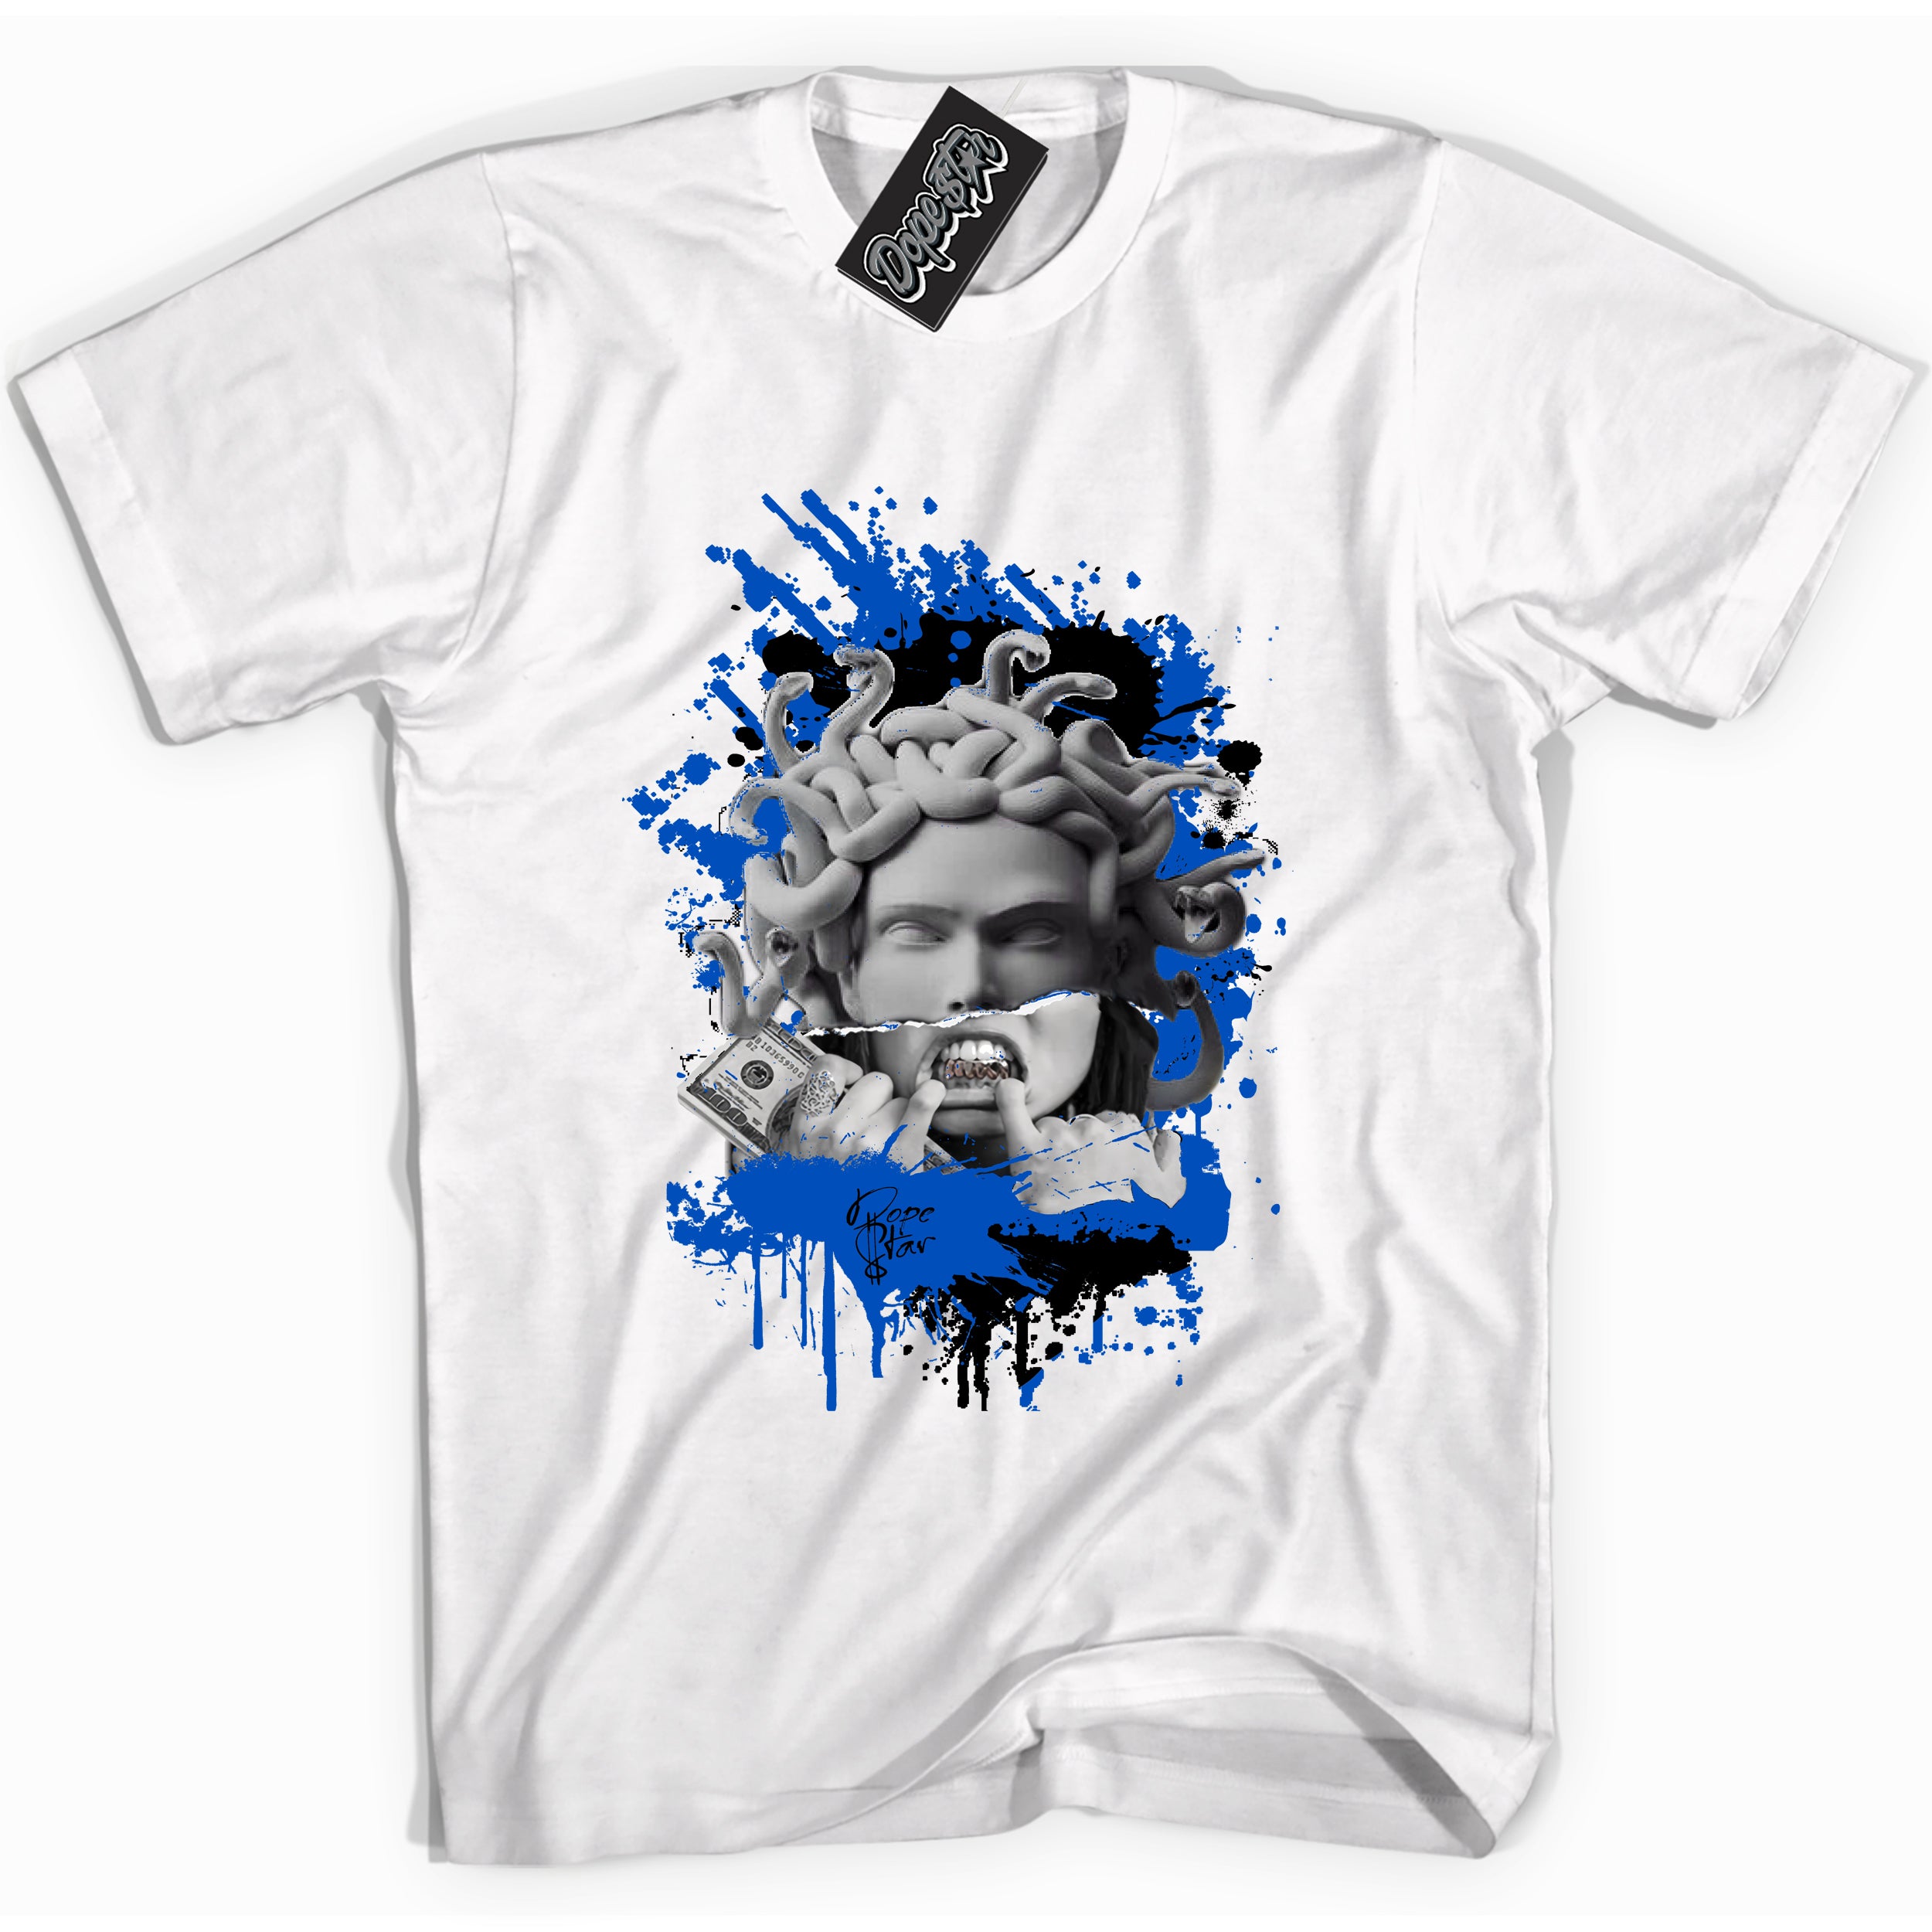 Cool White graphic tee with "Medusa" design, that perfectly matches Royal Reimagined 1s sneakers 